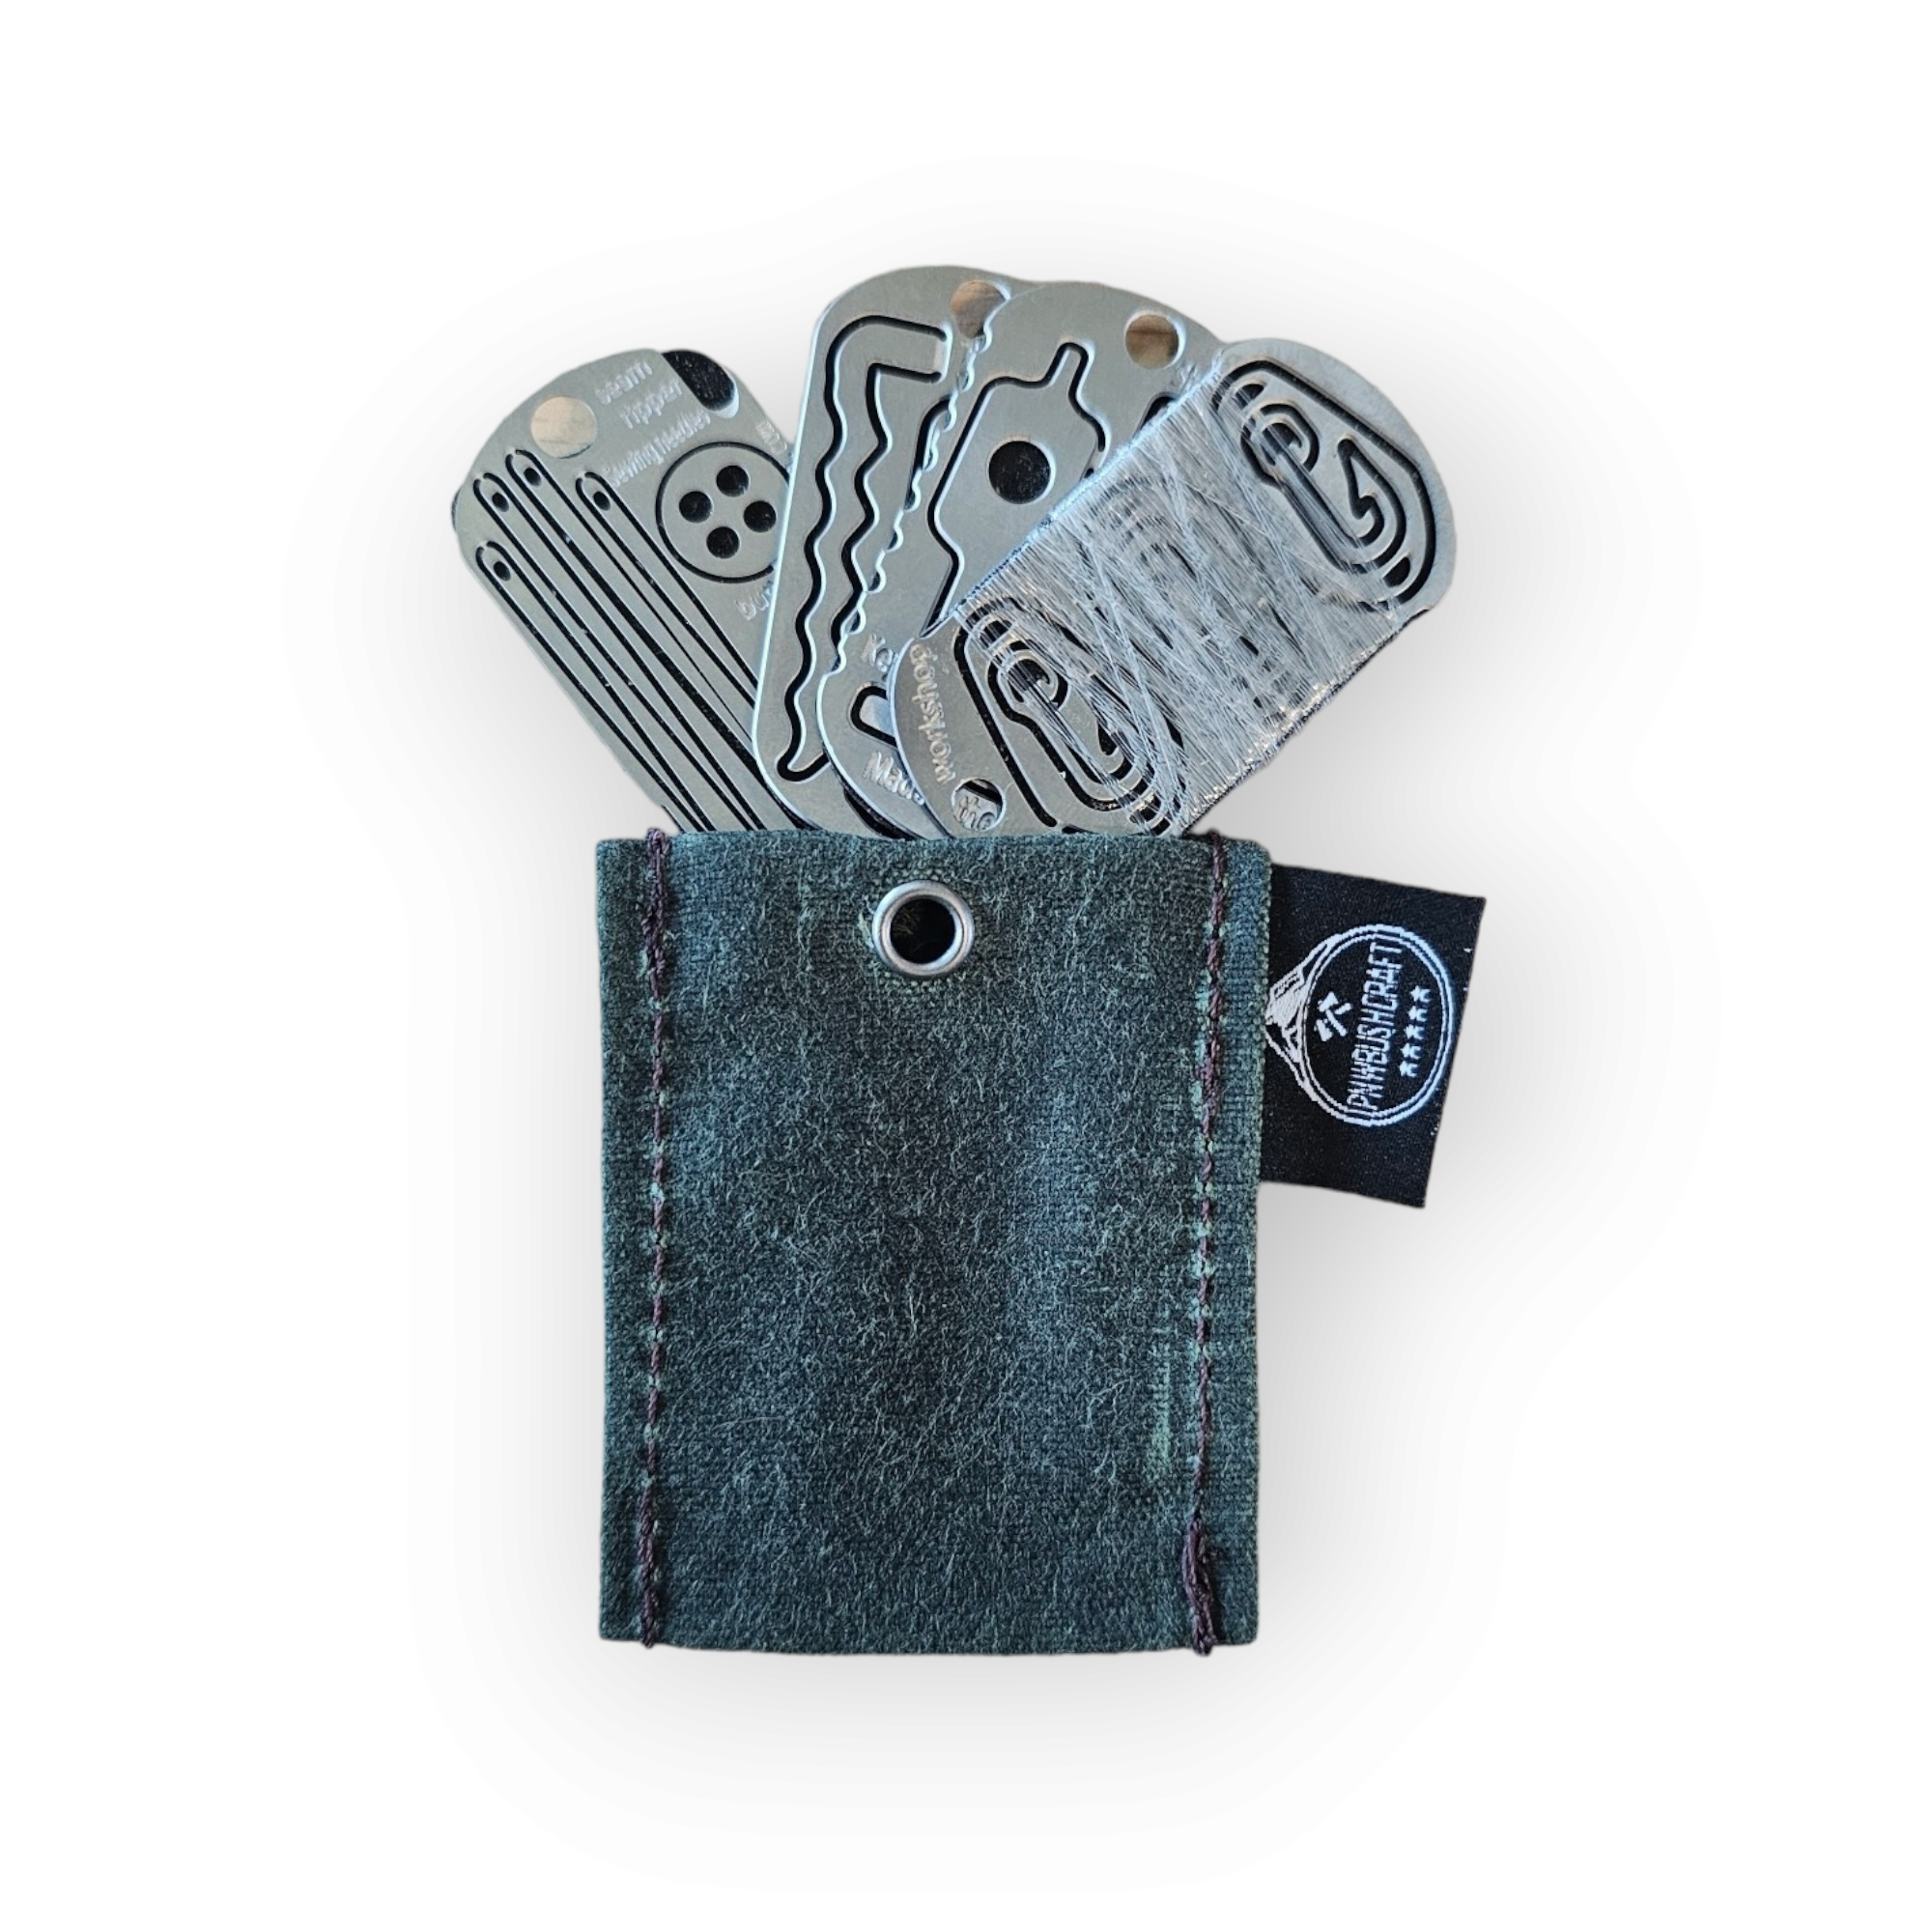 Waxed Canvas Mini EDC Pouch : Small Keychain Pouch for Micro Tool Tins, and Dog Tag Tools